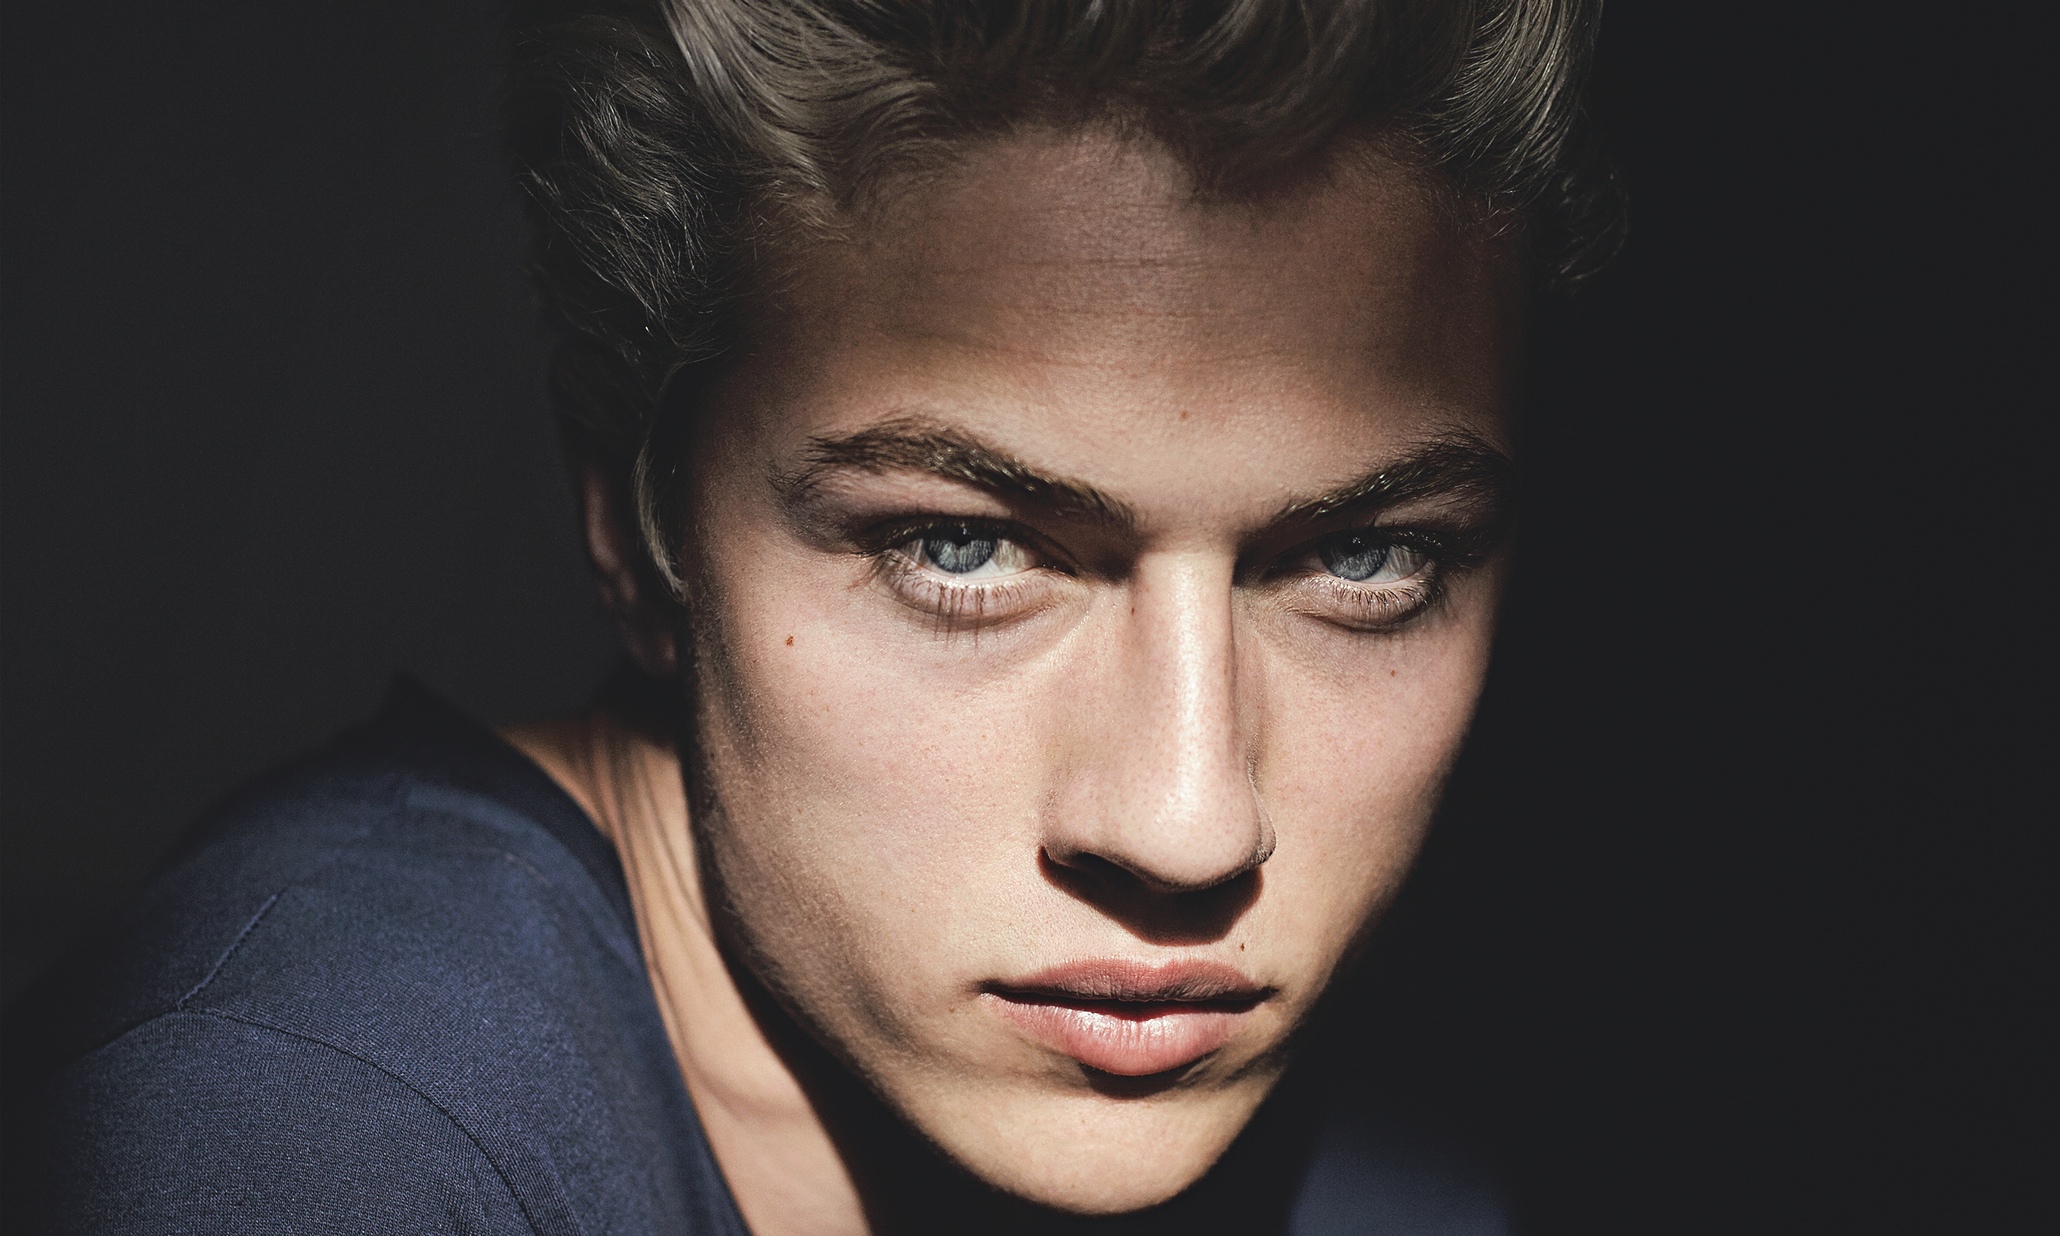 4. Lucky Blue Smith's Top Hair Products for Achieving a Messy, Textured Look - wide 8